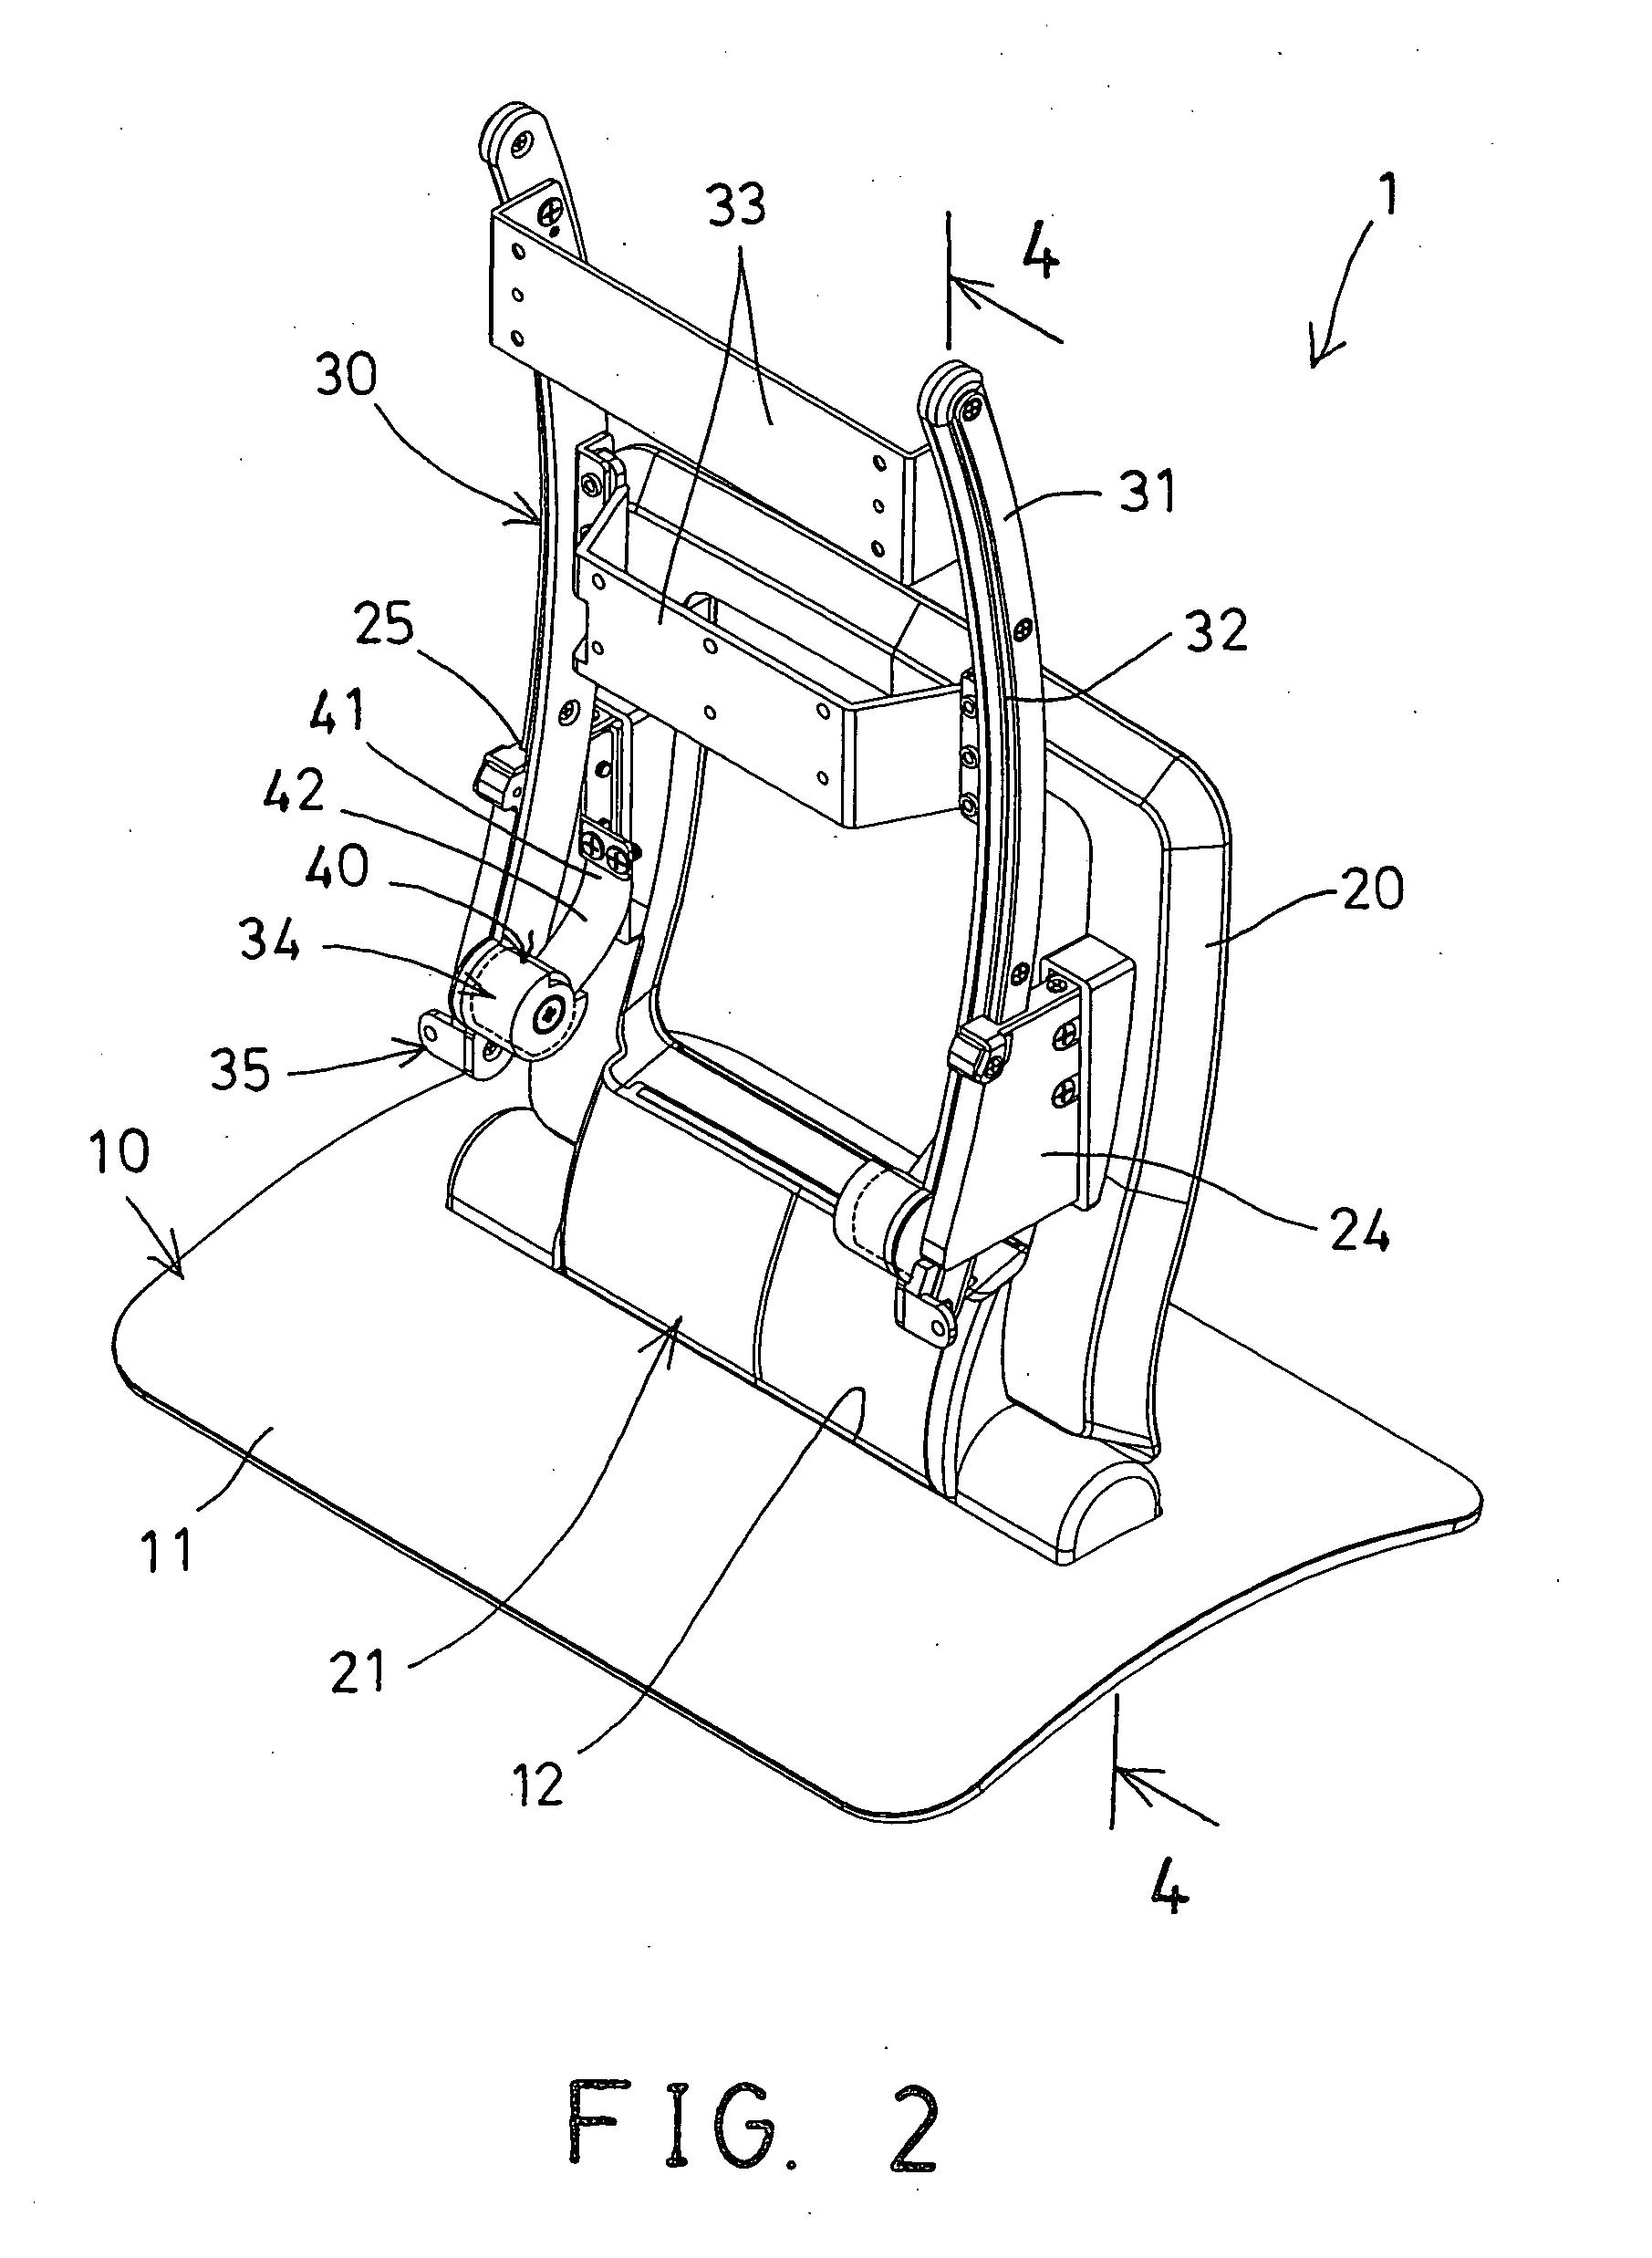 Adjustable support device for monitor